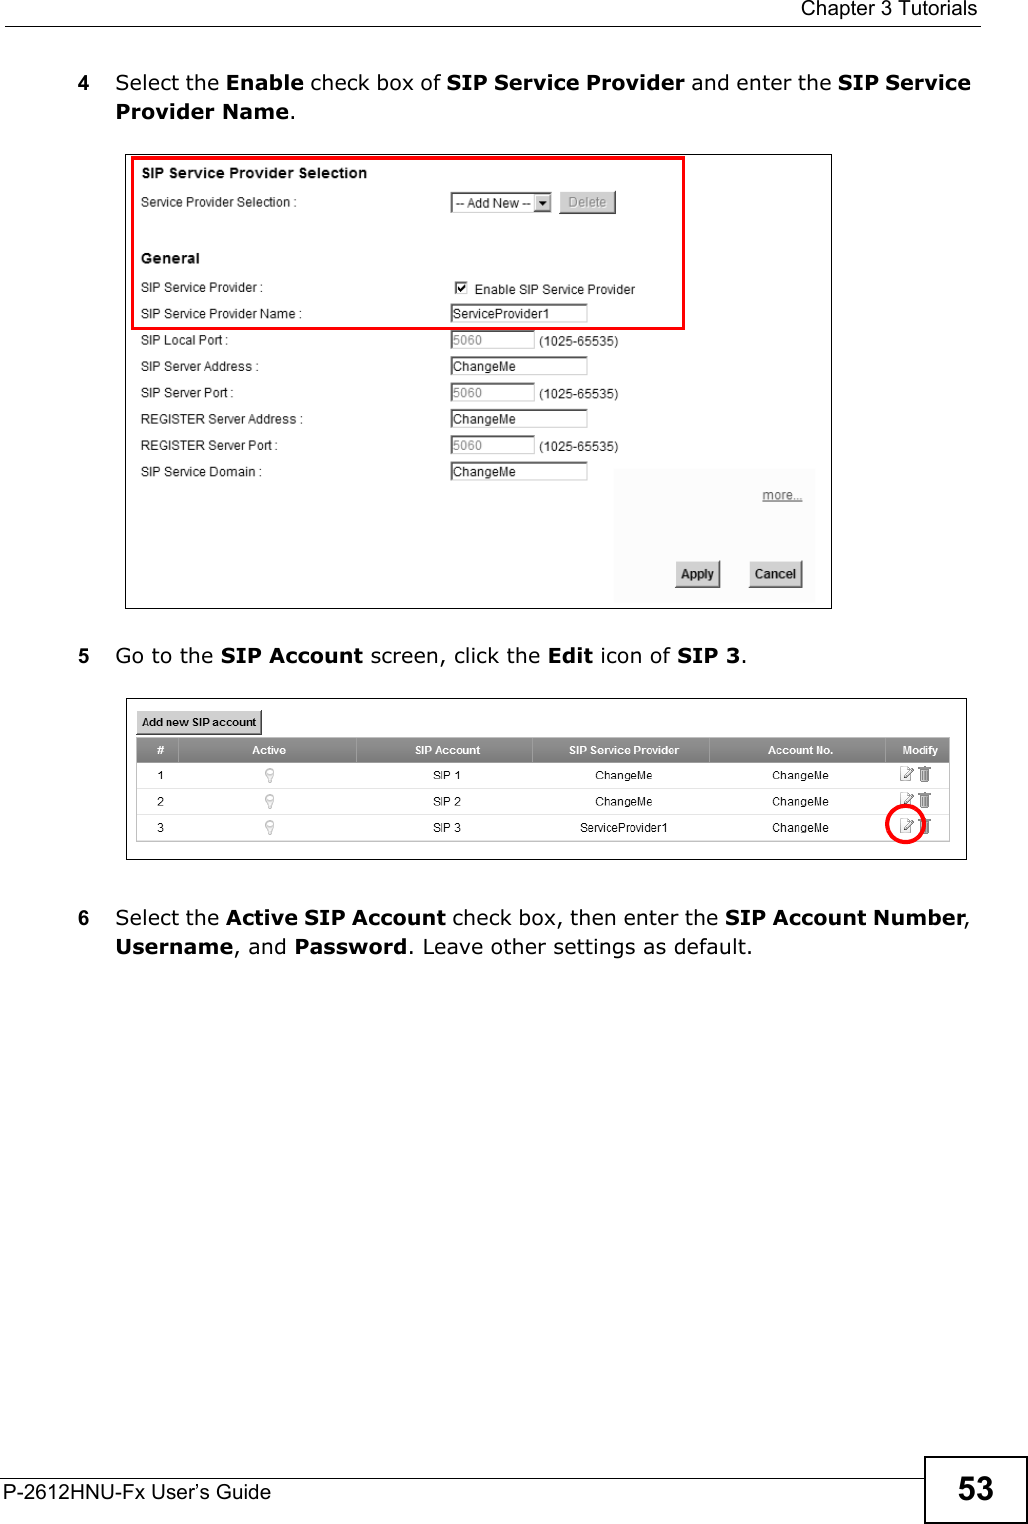  Chapter 3 TutorialsP-2612HNU-Fx User’s Guide 534Select the Enable check box of SIP Service Provider and enter the SIP Service Provider Name.5Go to the SIP Account screen, click the Edit icon of SIP 3.6Select the Active SIP Account check box, then enter the SIP Account Number, Username, and Password. Leave other settings as default.